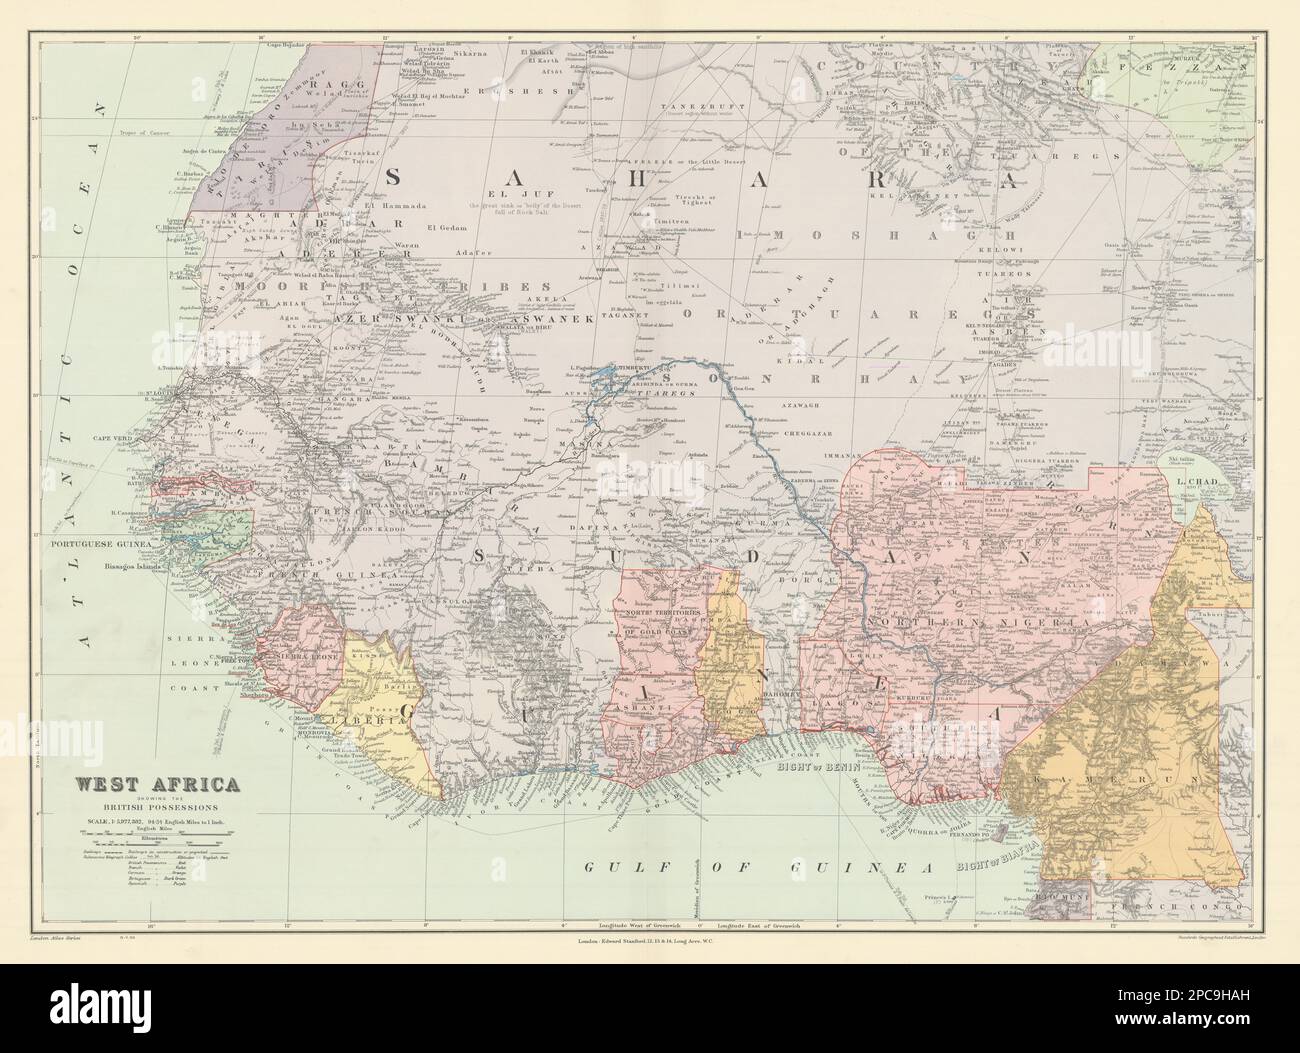 West Africa showing British Possessions. Nigeria Gold Coast. STANFORD 1904 map Stock Photo